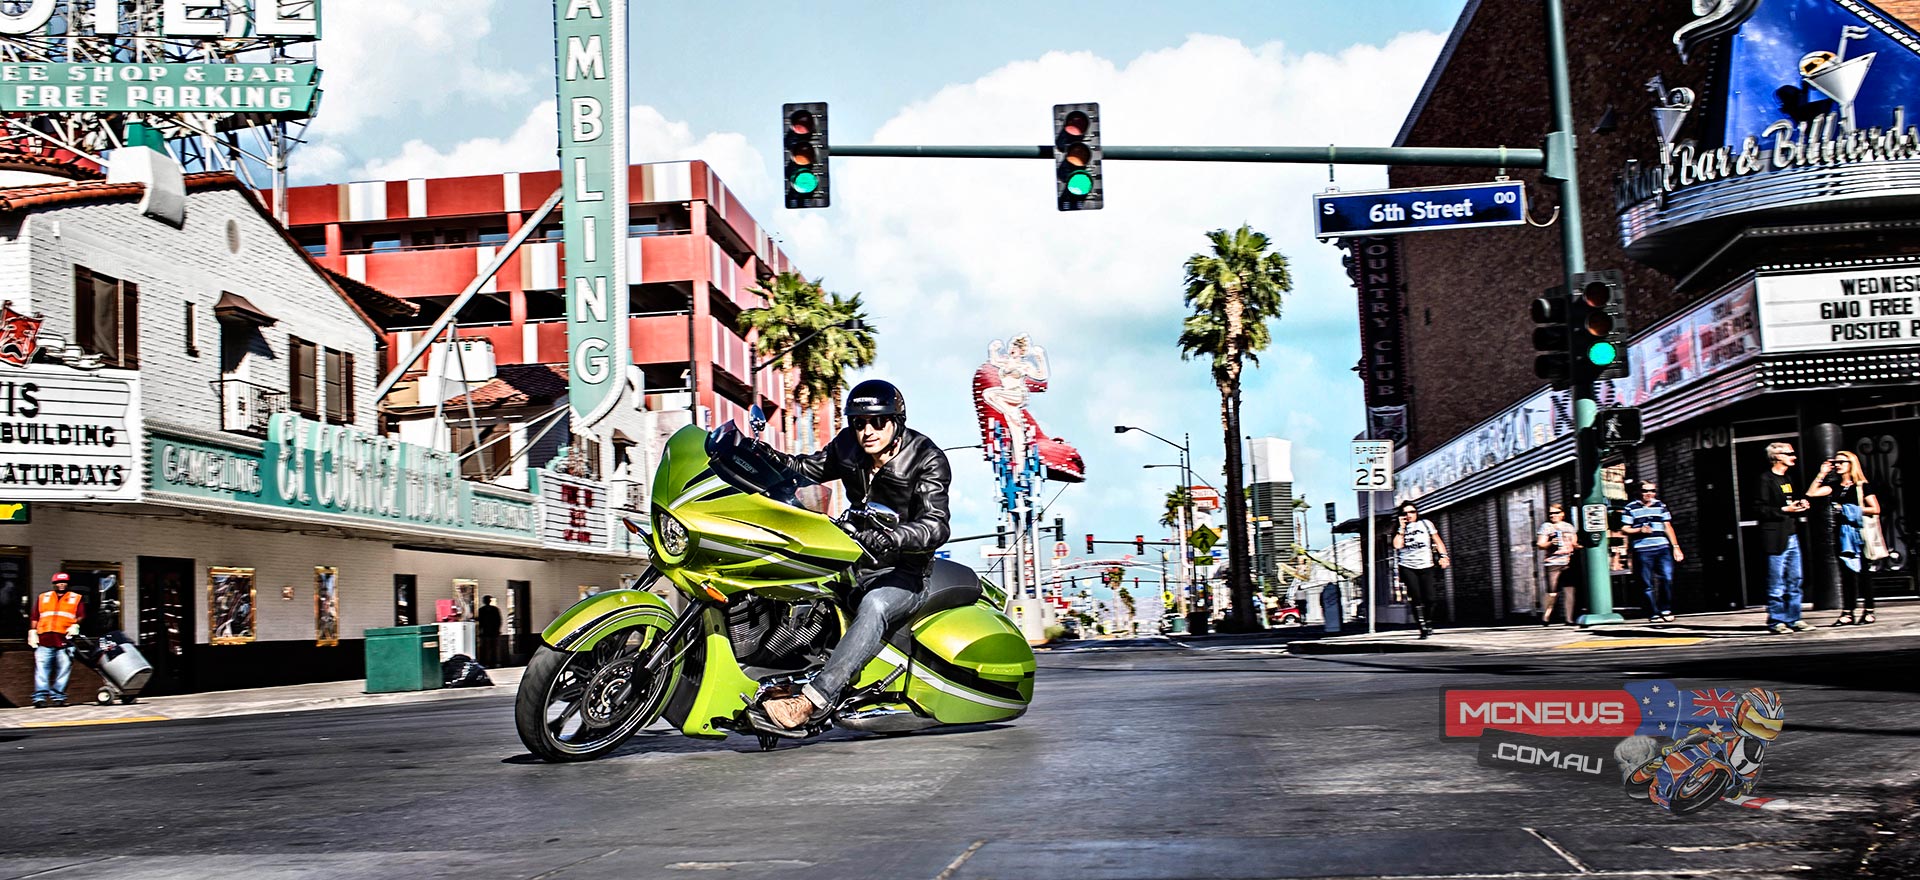 Victory announce new 'Magnum' bagger